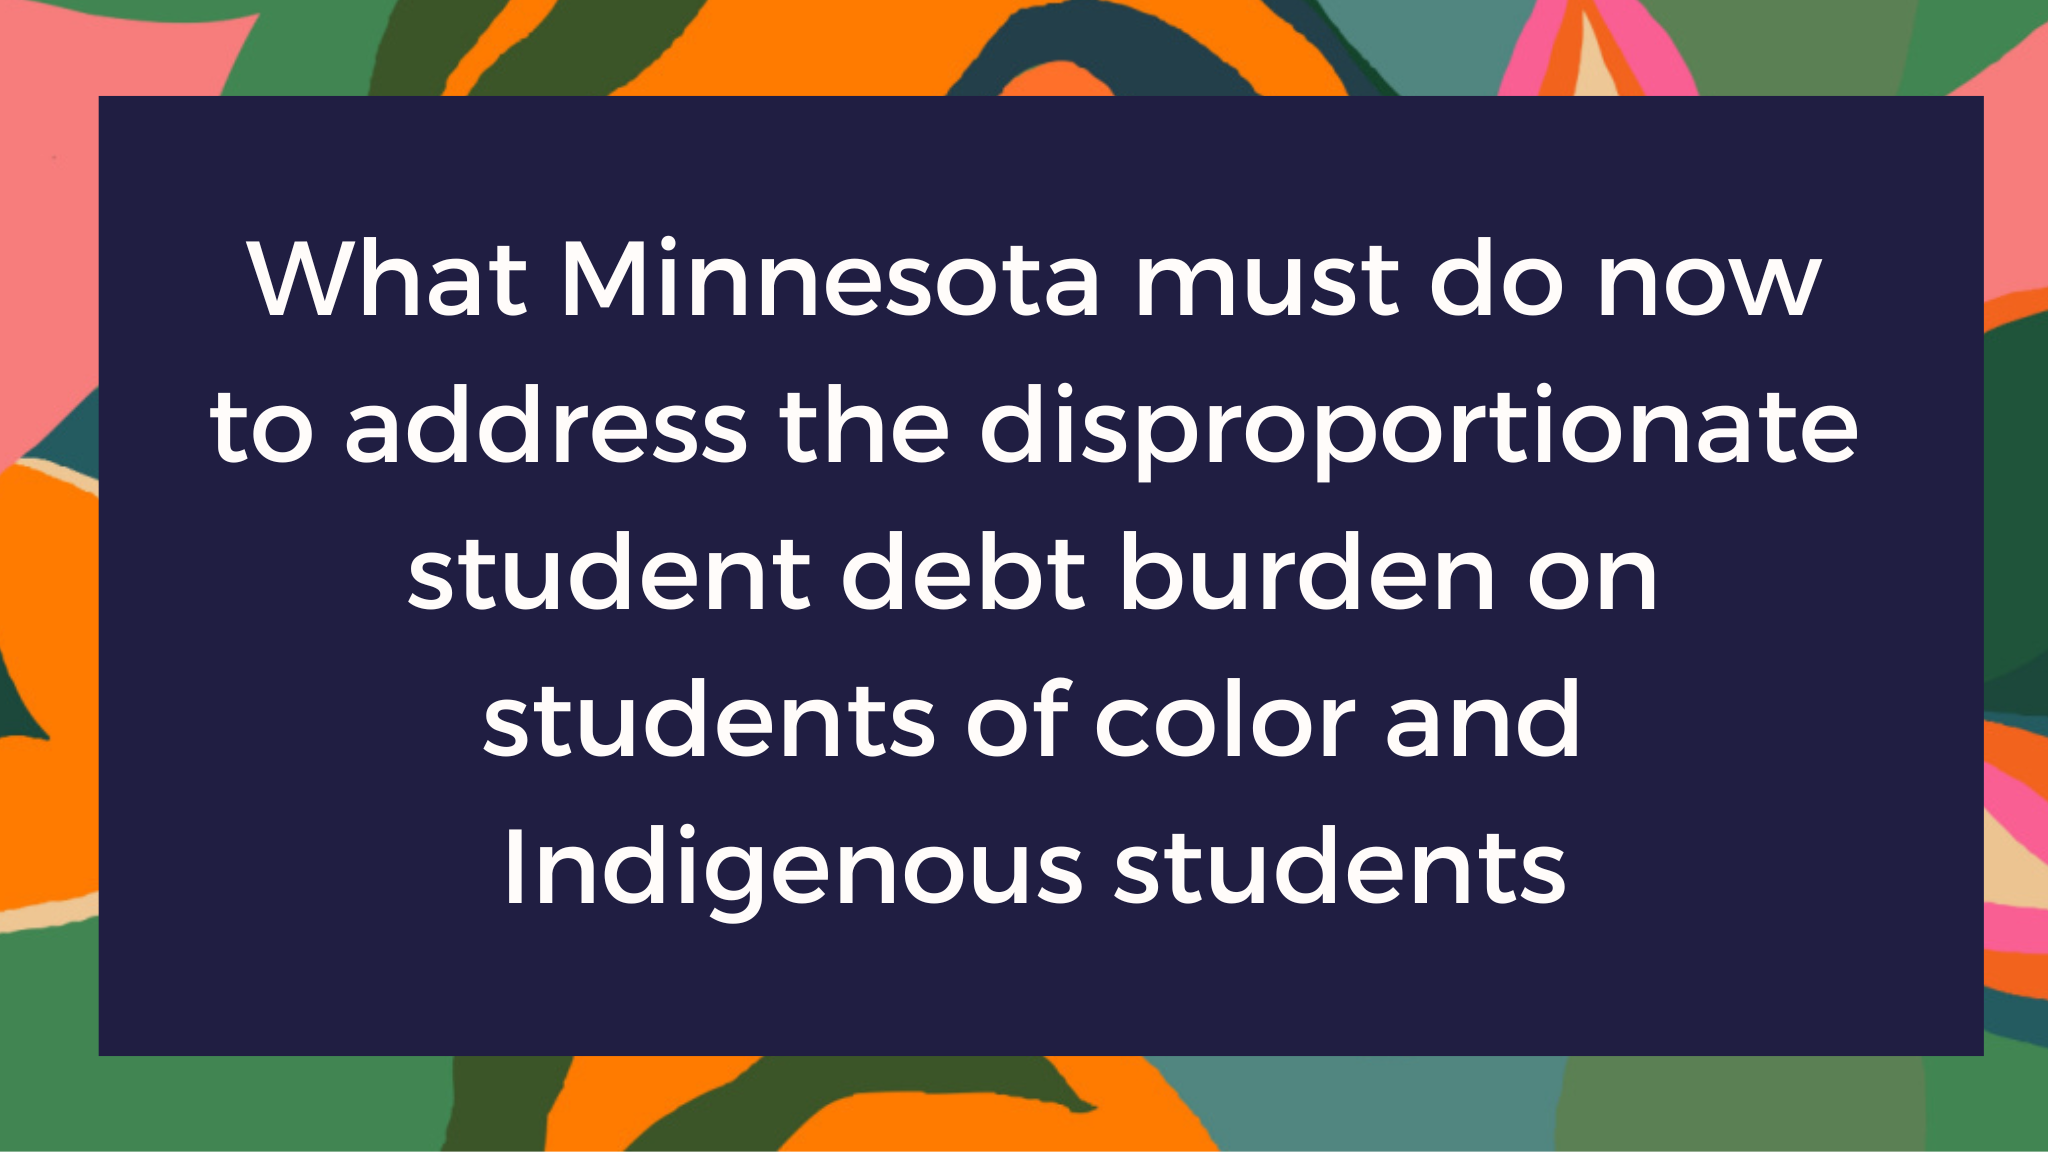 What does Minnesota’s student debt look like?